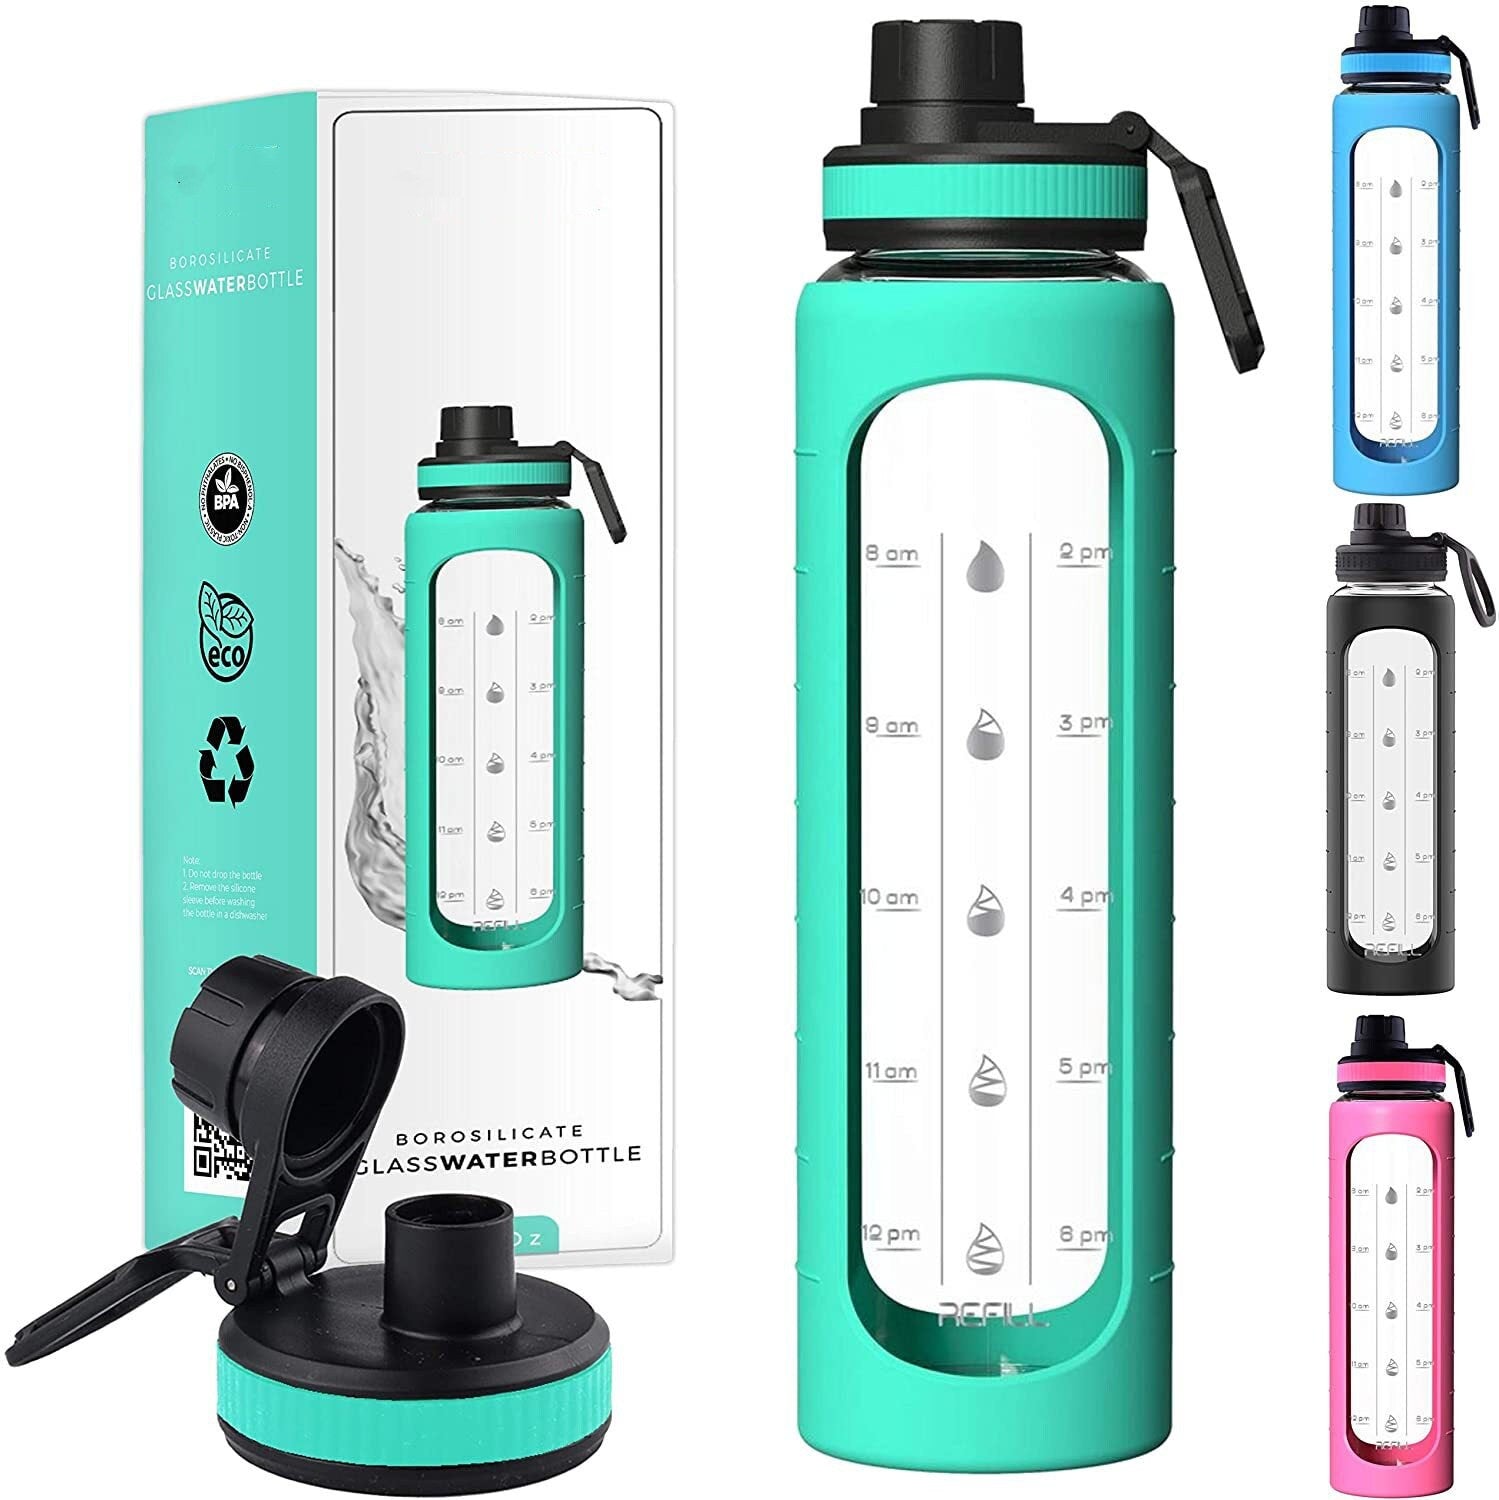 Fashionable Sports Water Bottle With Large Capacity Cleaning Brush